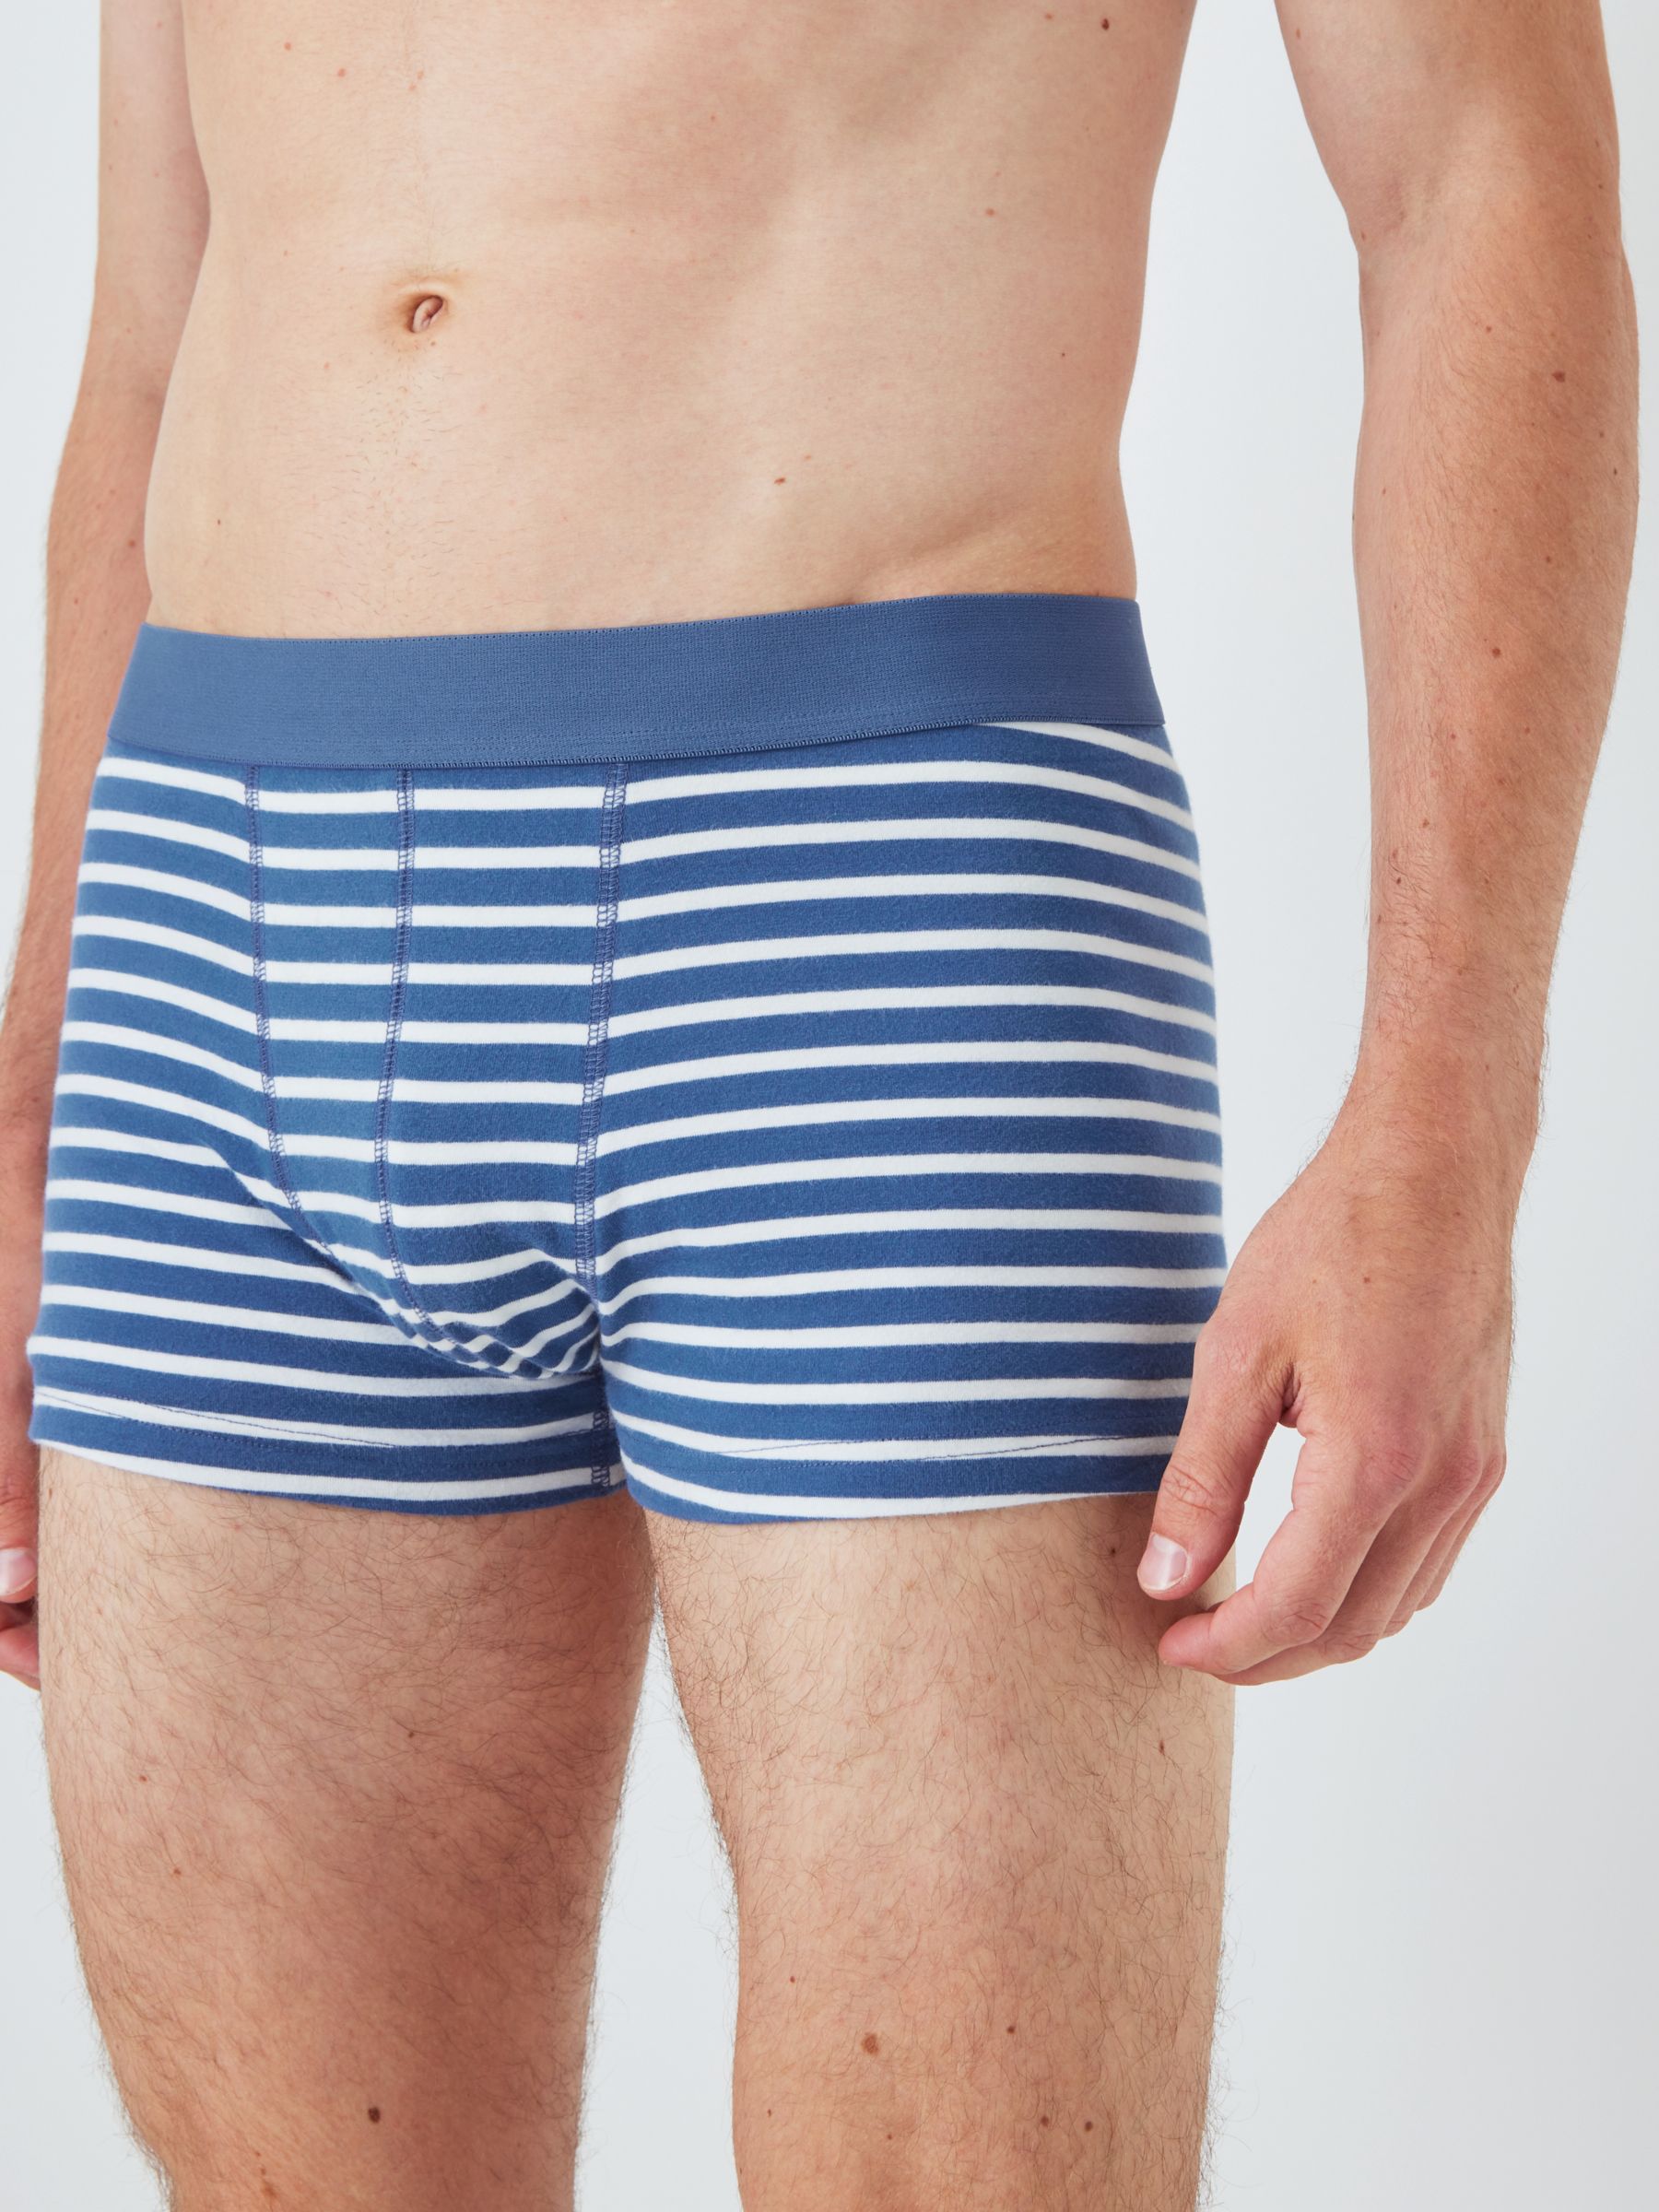 Buy John Lewis ANYDAY Stretch Cotton Stripe Plain Trunks, Pack of 3, Blue/White Online at johnlewis.com